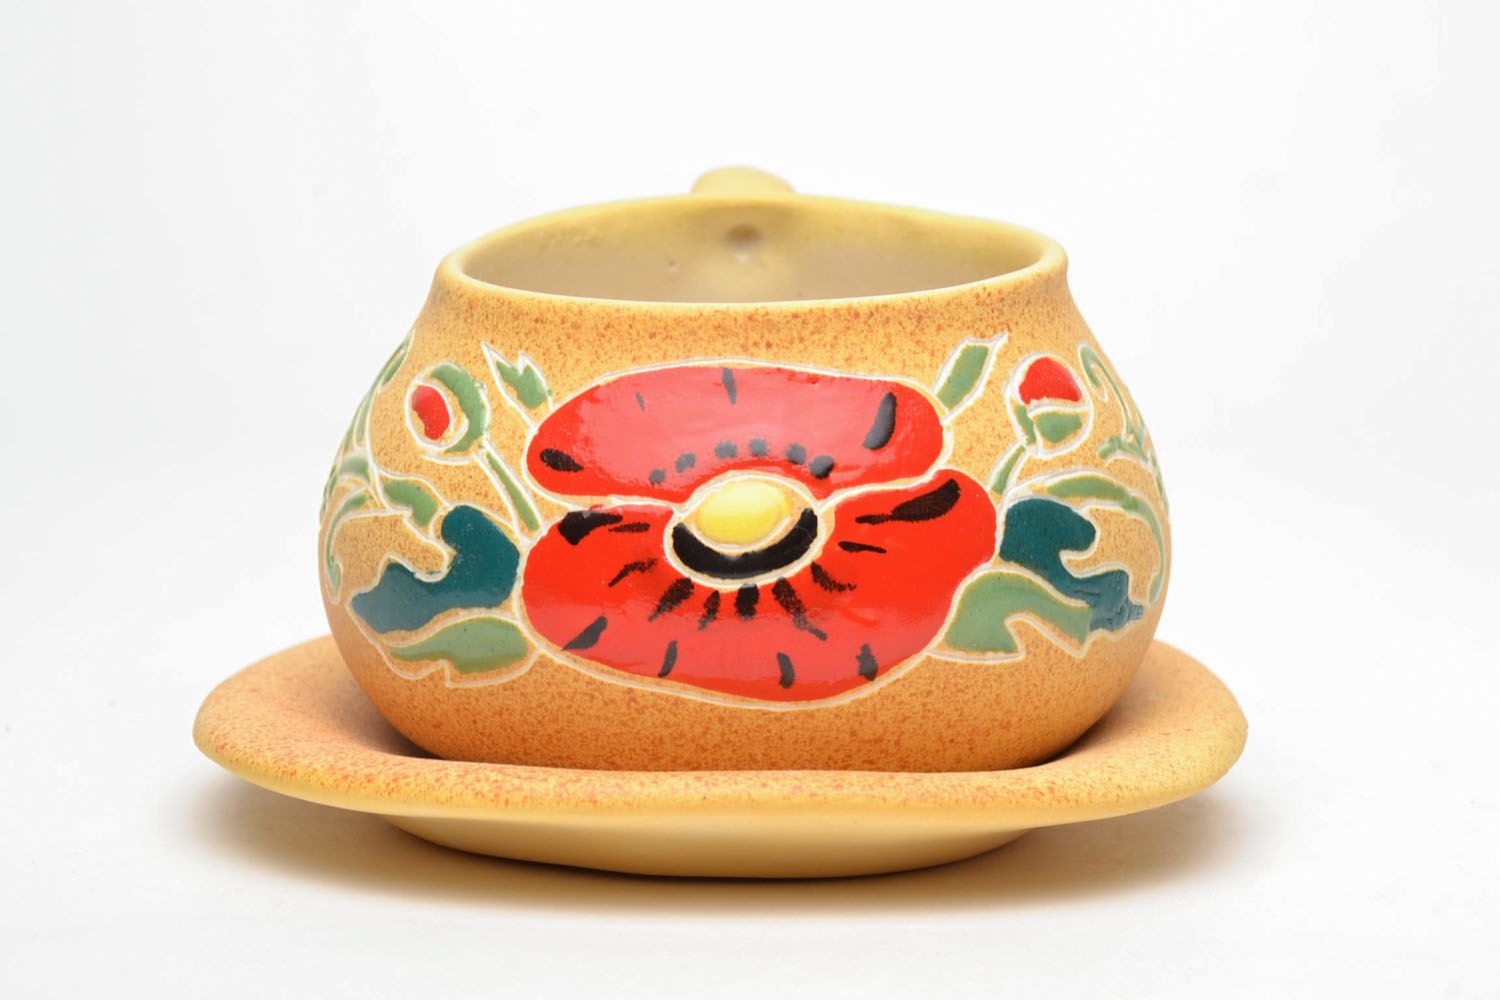 Pot shape clay 5 oz cup for coffee or tea with saucer and handle. Floral red poppies pattern. photo 2